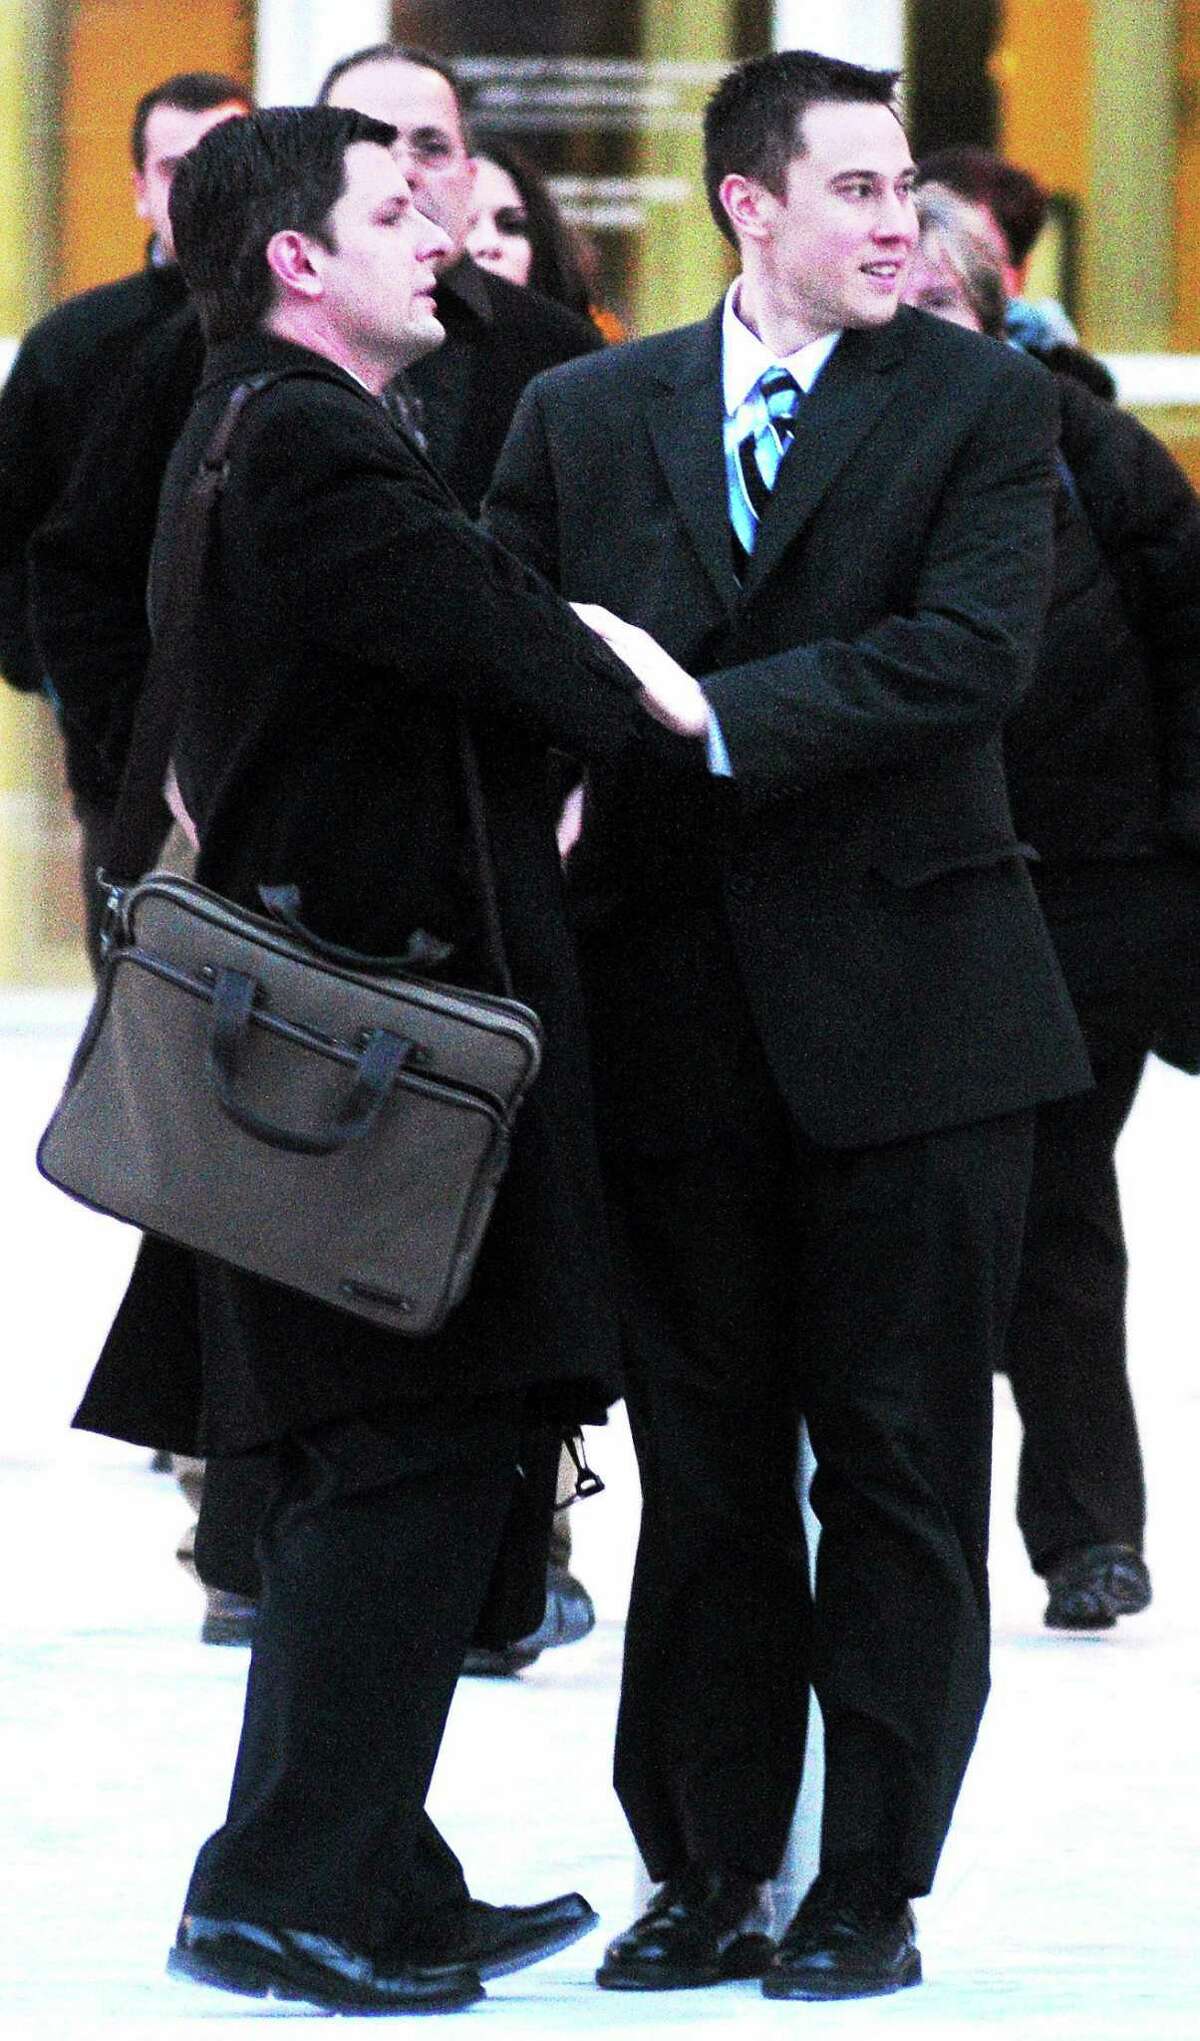 Former East Haven police Officer Dennis Spaulding, right, leaves federal court in Hartford Thursday after being sentenced to 5 years in prison.